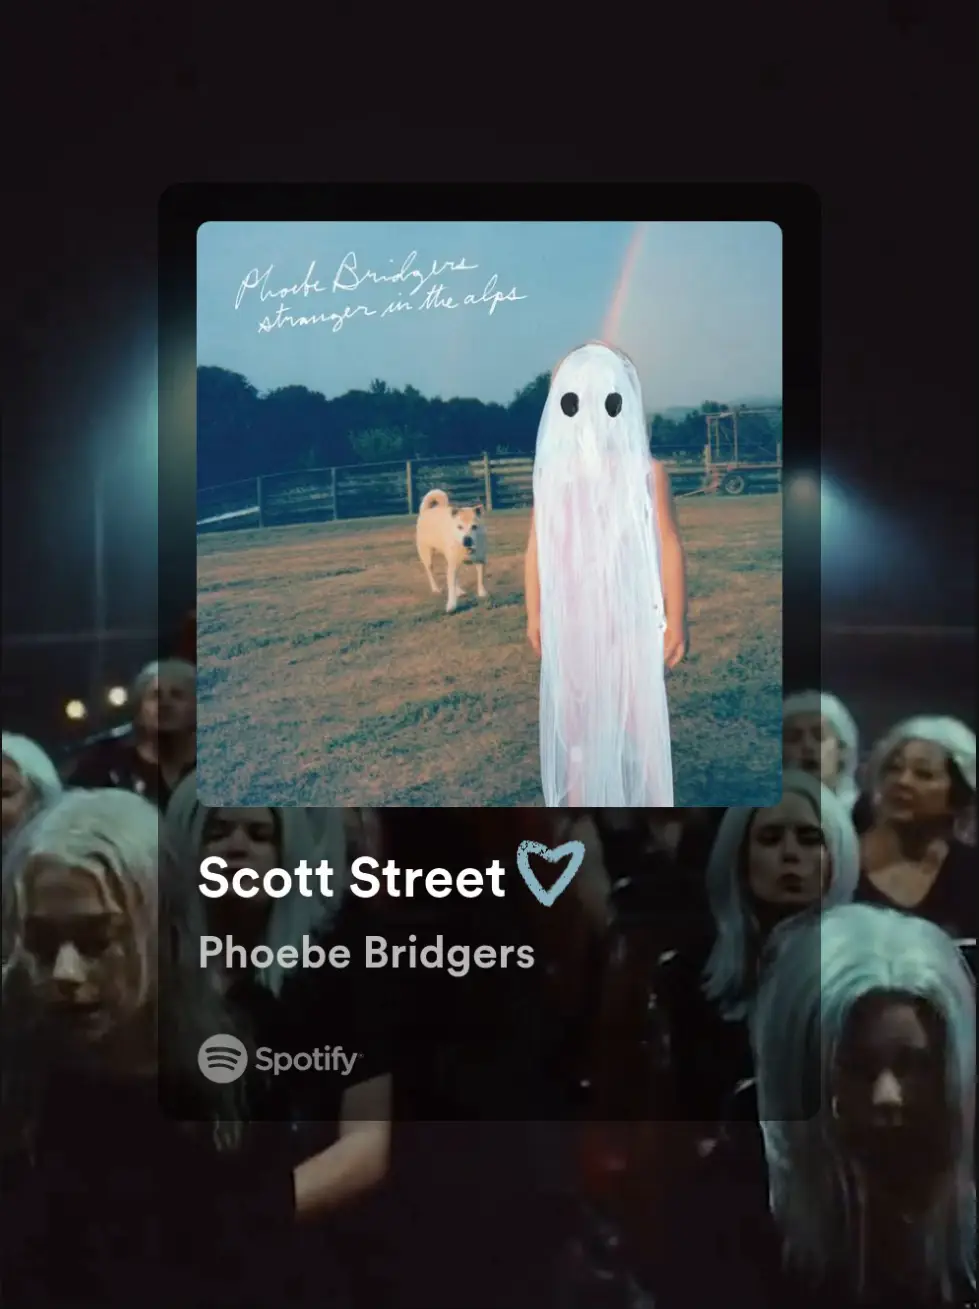  A Spotify playlist of music by Scott Street and Phoebe Bridgers.